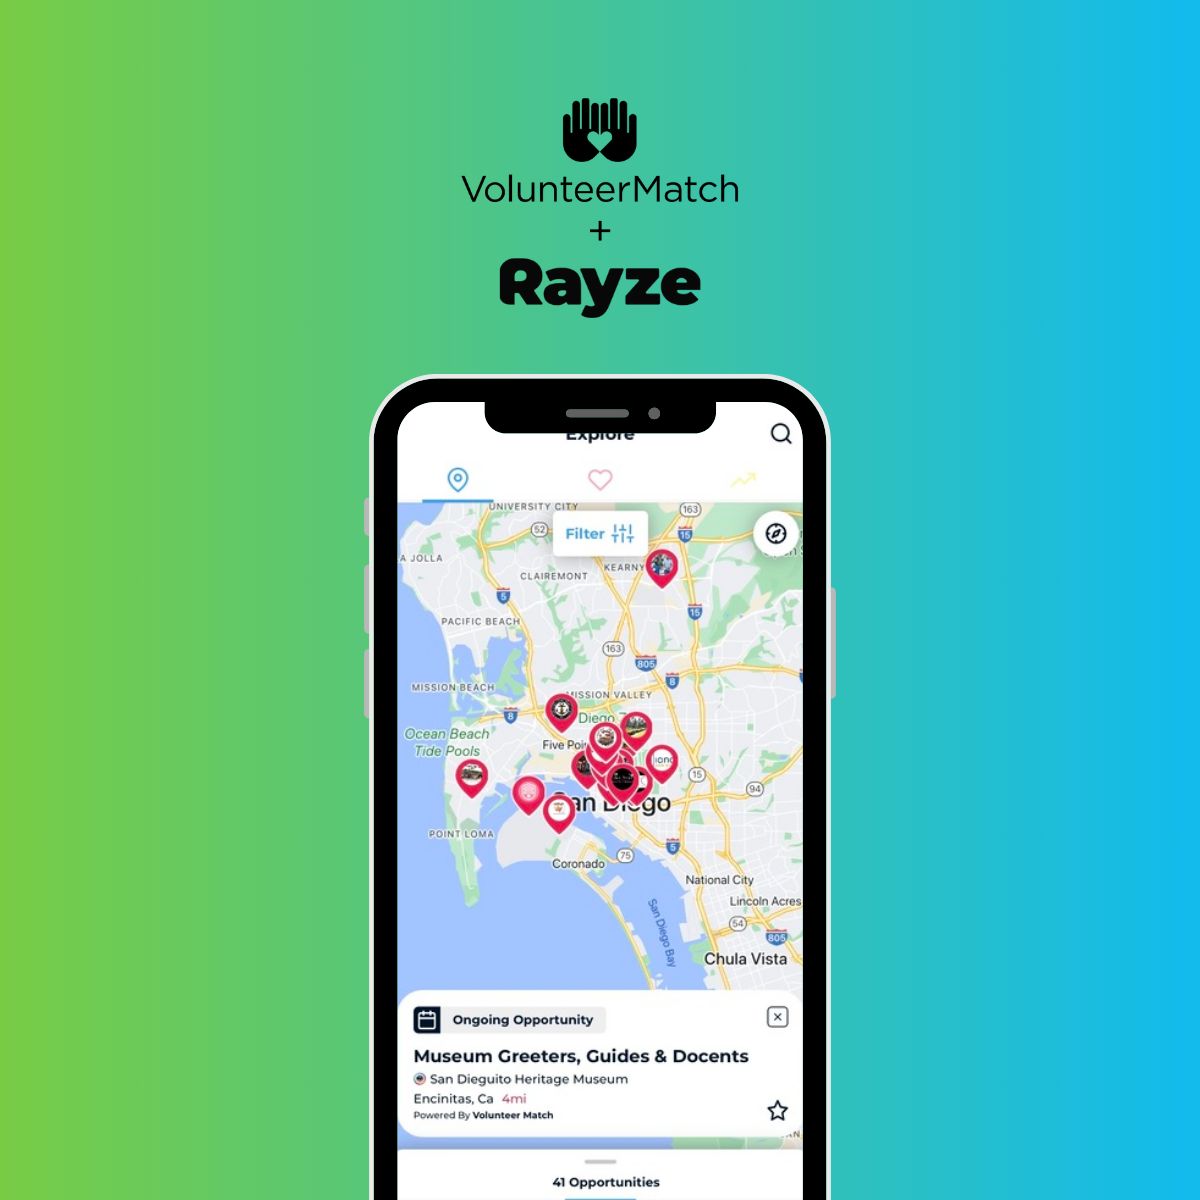 Repost from VolunteerMatch: Looking for a way to give back near you? Do good on the go with the new Rayze App map feature powered by VolunteerMatch! 🌎 #Volunteer #Youthvolunteering #Community #Rayze #VolunteerMatch